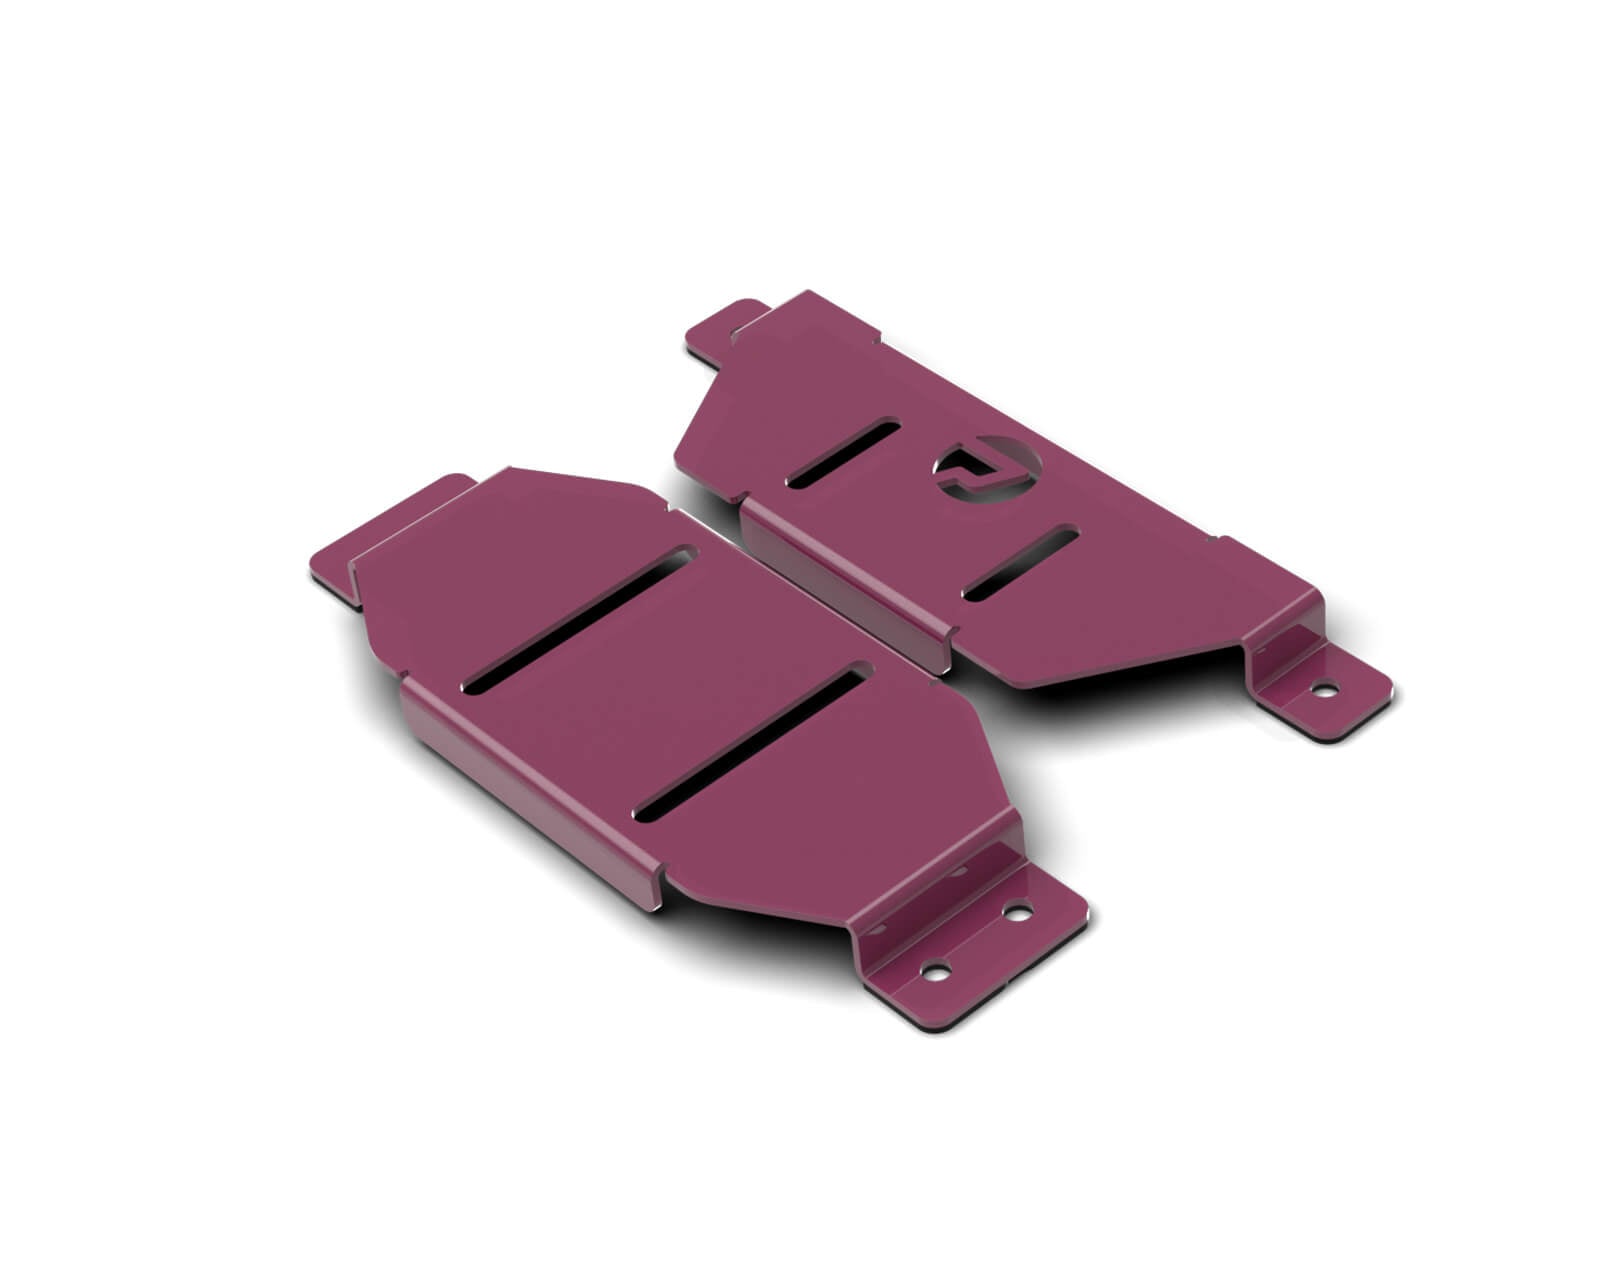 PrimoChill SX Offset CTR Hard Mount Reservoir to Radiator Mount - 140mm Series - PrimoChill - KEEPING IT COOL Magenta